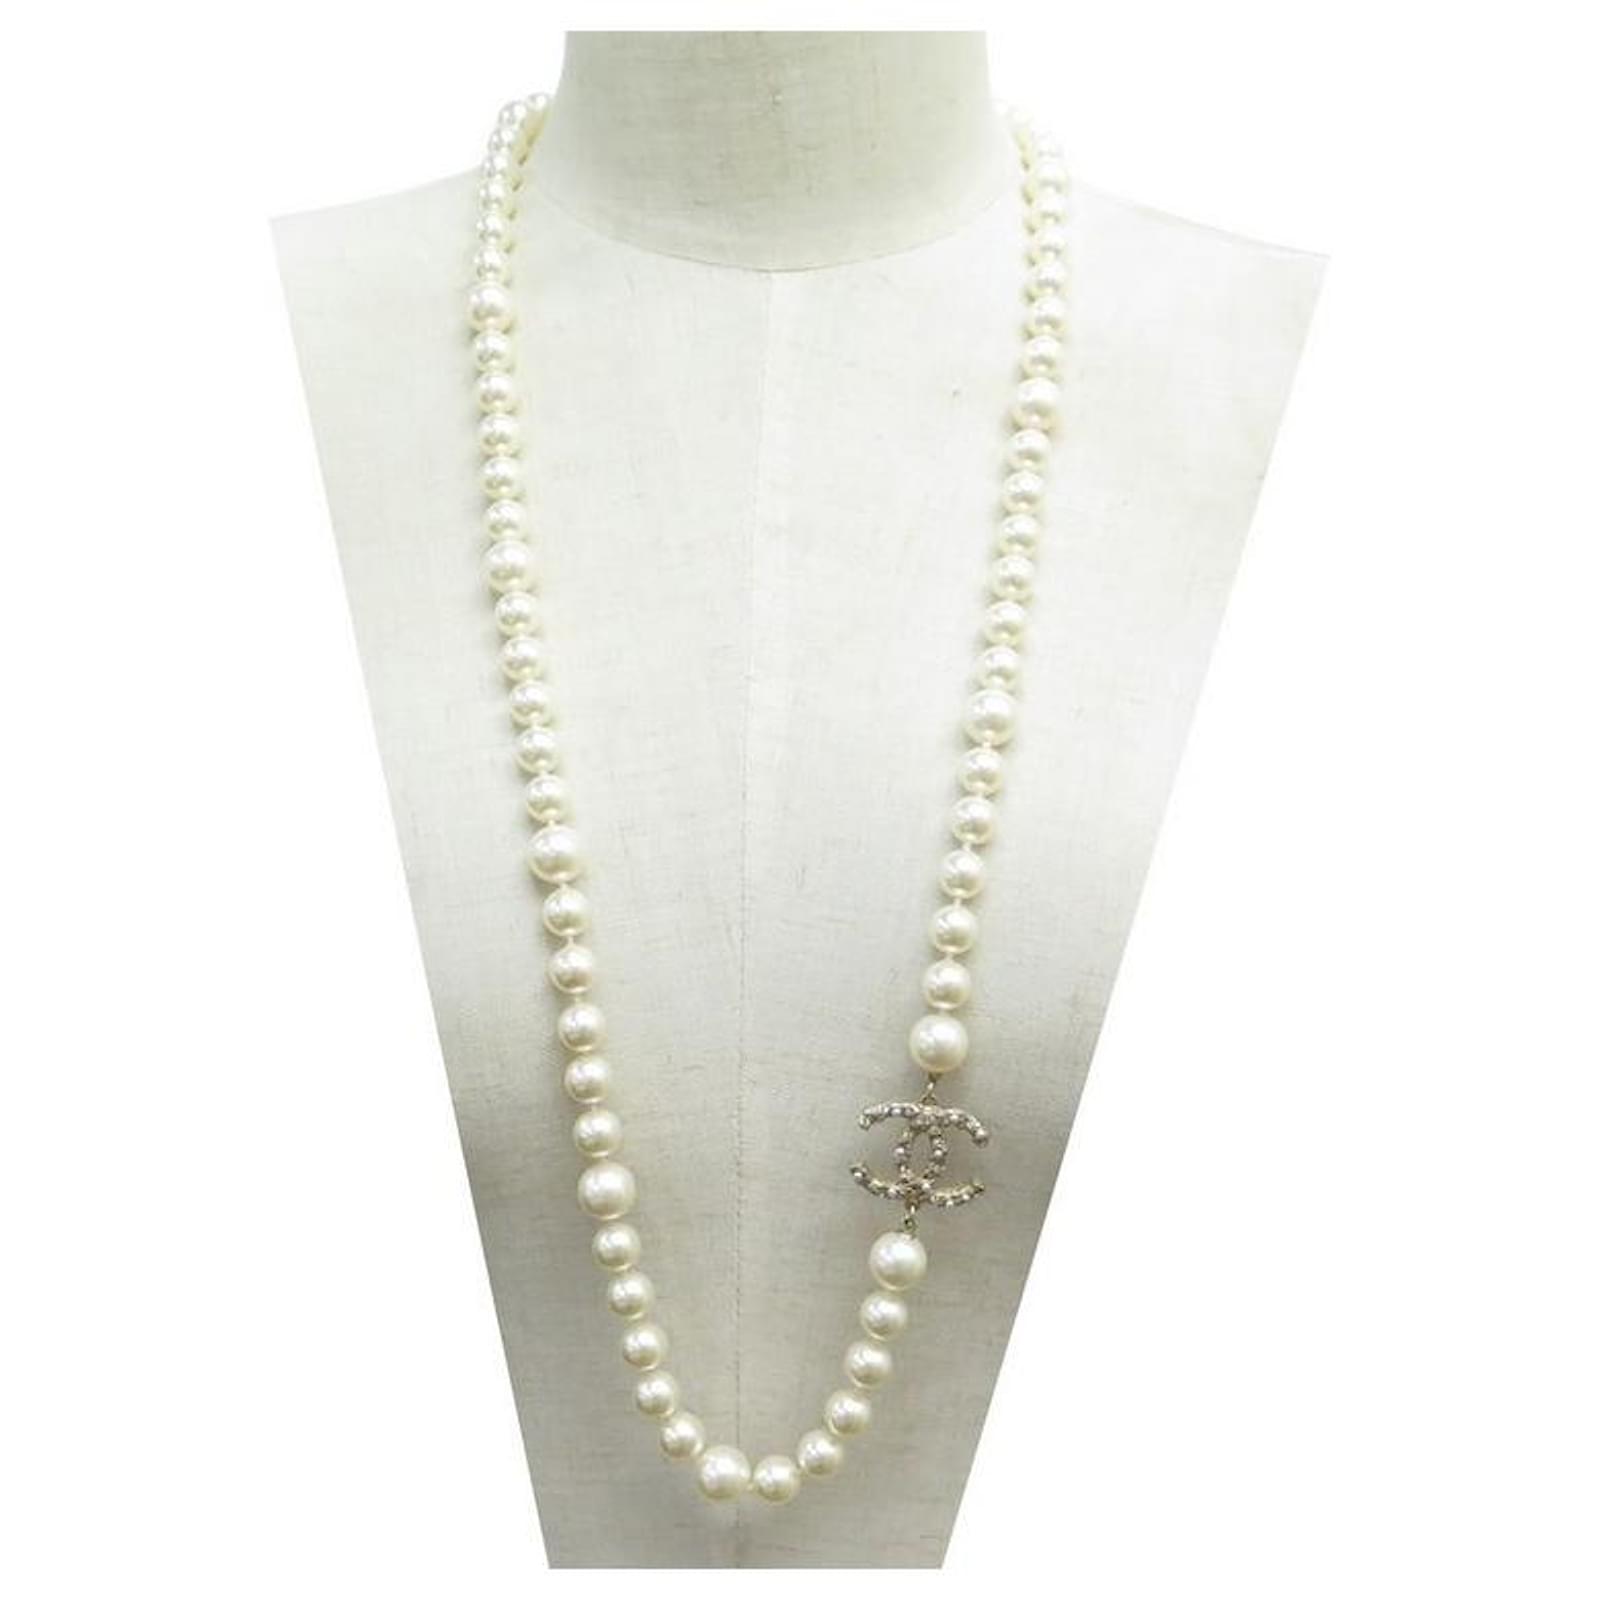 NEW CHANEL NECKLACE SAUTOIR WHITE PEARLS LOGO CC 102CM PEARLS